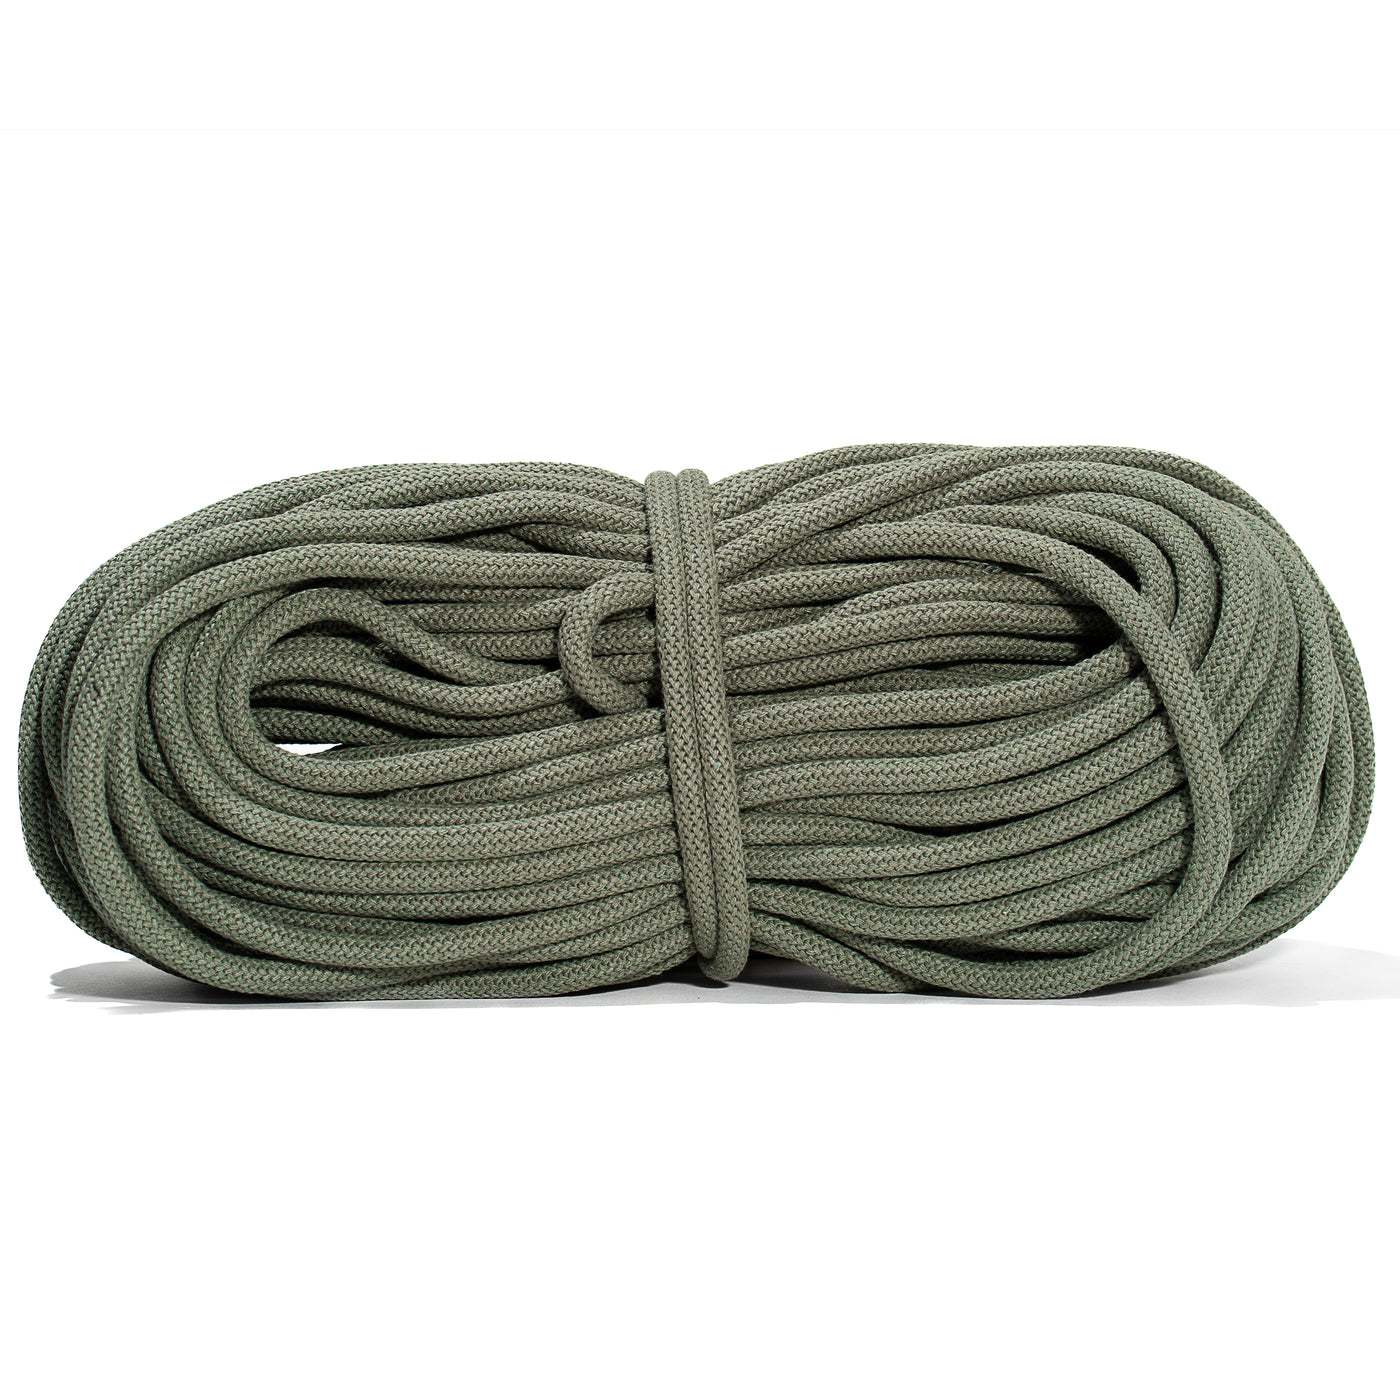 Braided Recycled Cotton Cord 9mm - Bay Leaf